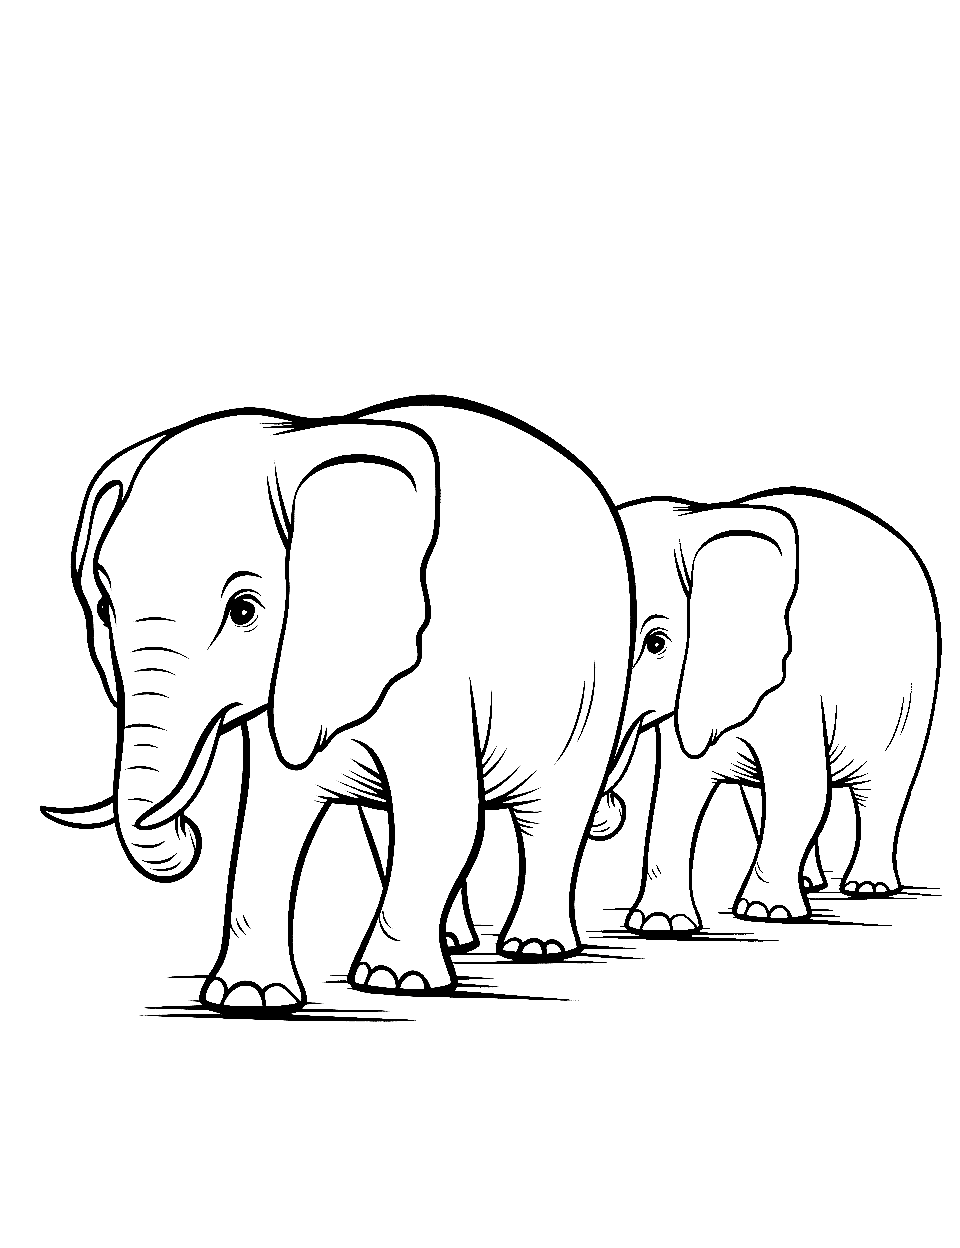 How to Draw Animals: Elephants, Their Species and Anatomy | Envato Tuts+